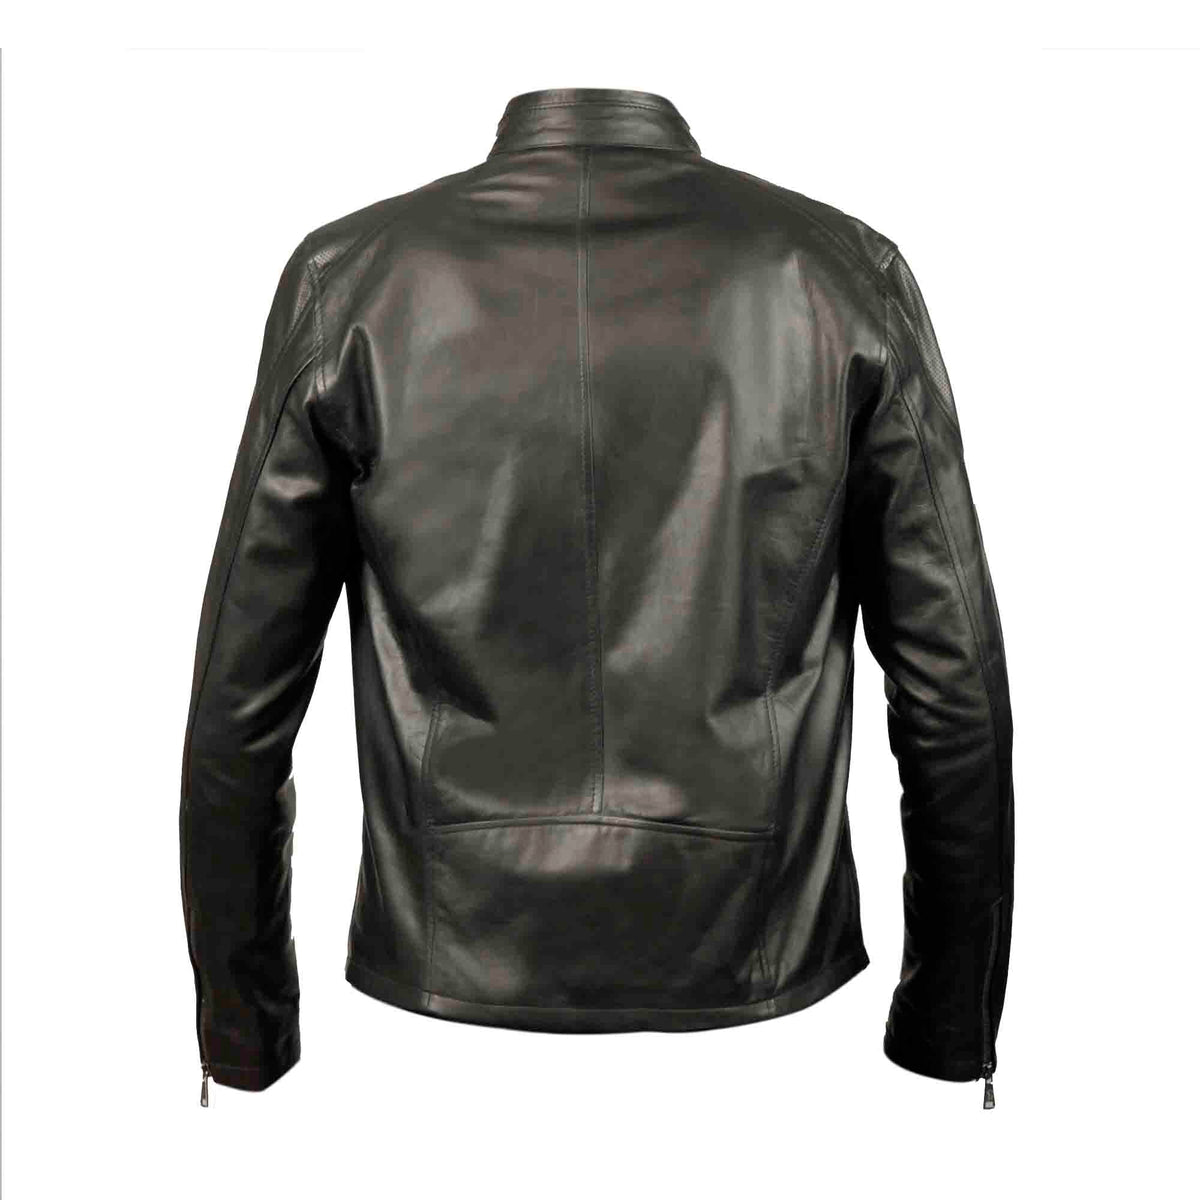 Sports jacket in black vegetable tanned leather